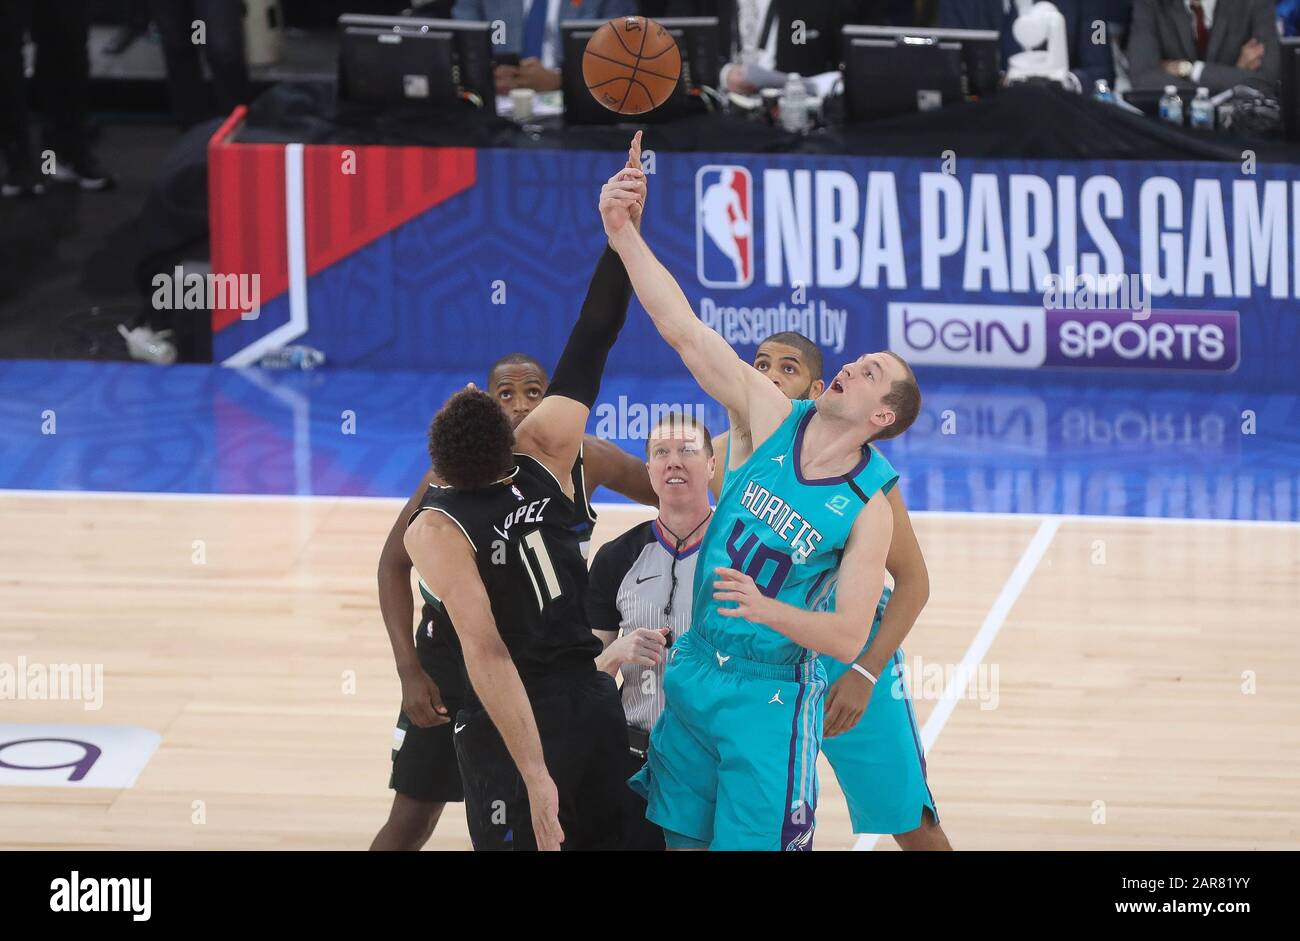 Cody Zeller of Charlotte Hornets and Brook Lopez of Milwaukee Bucks during  the NBA Paris Game 2020 basketball match between Milwaukee Bucks and  Charlotte Hornets on January 24, 2020 at AccorHotels Arena